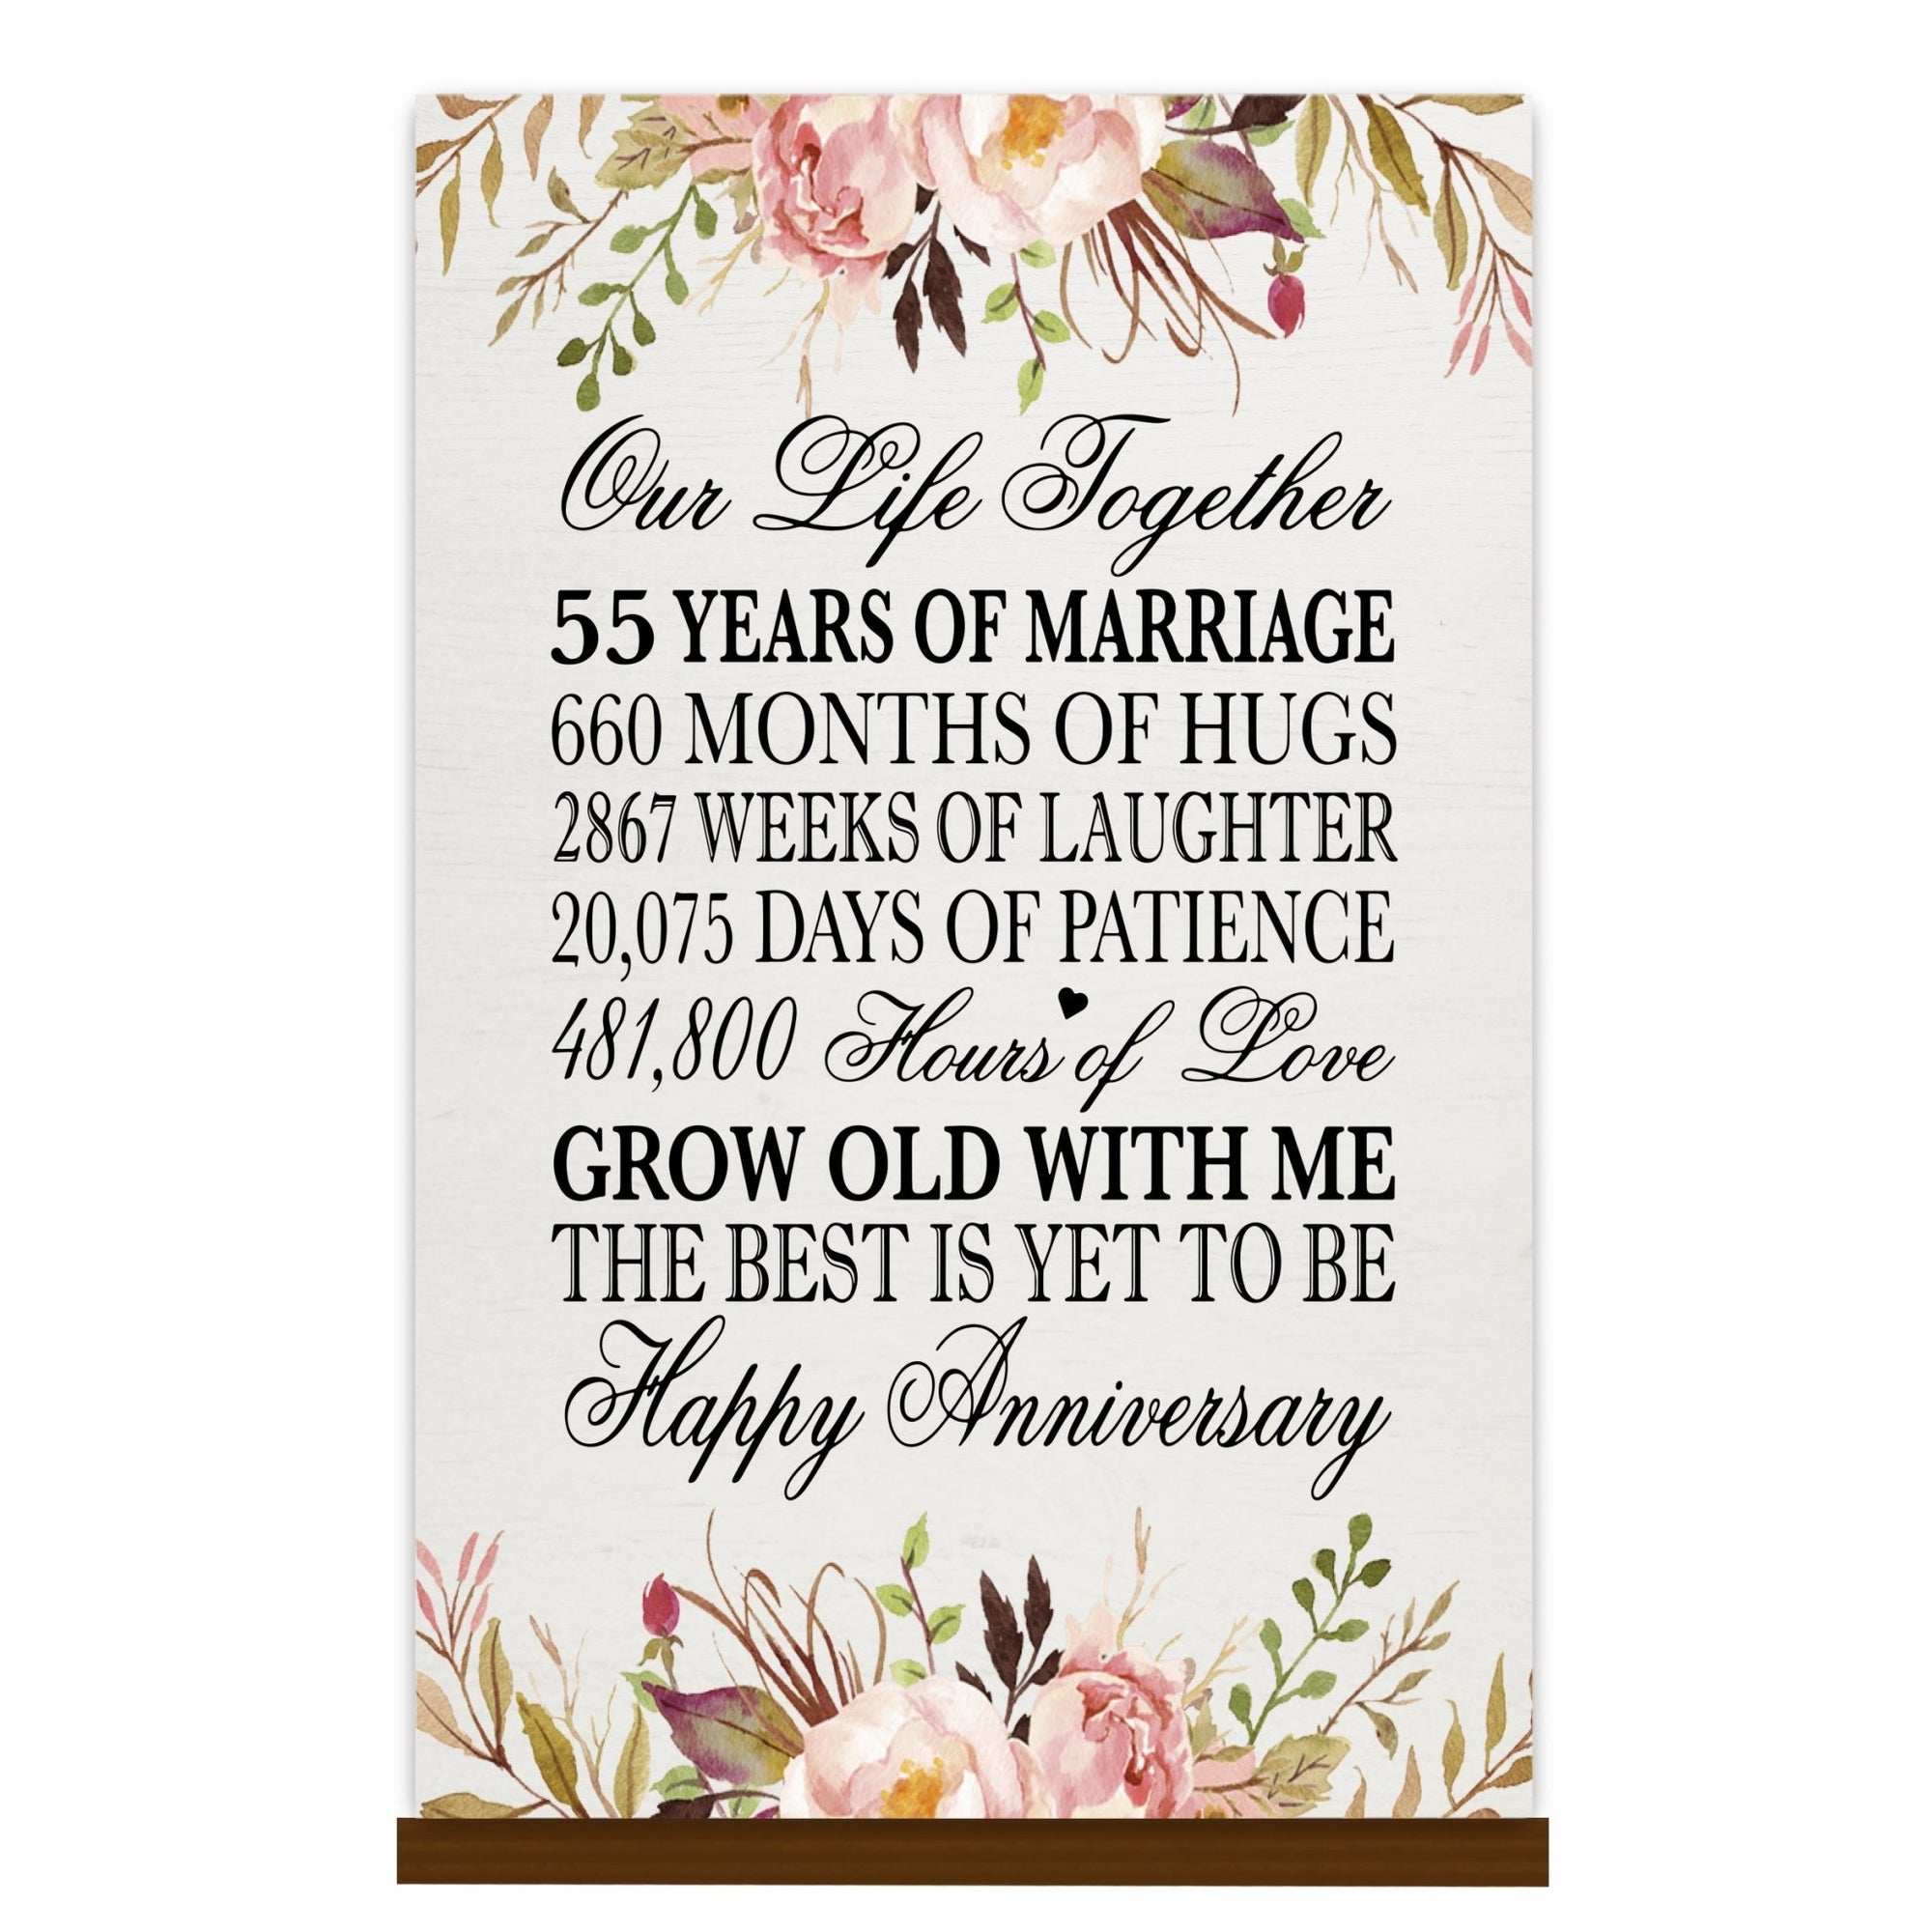 LifeSong Milestones 55th Anniversary Wall Plaque for Couples